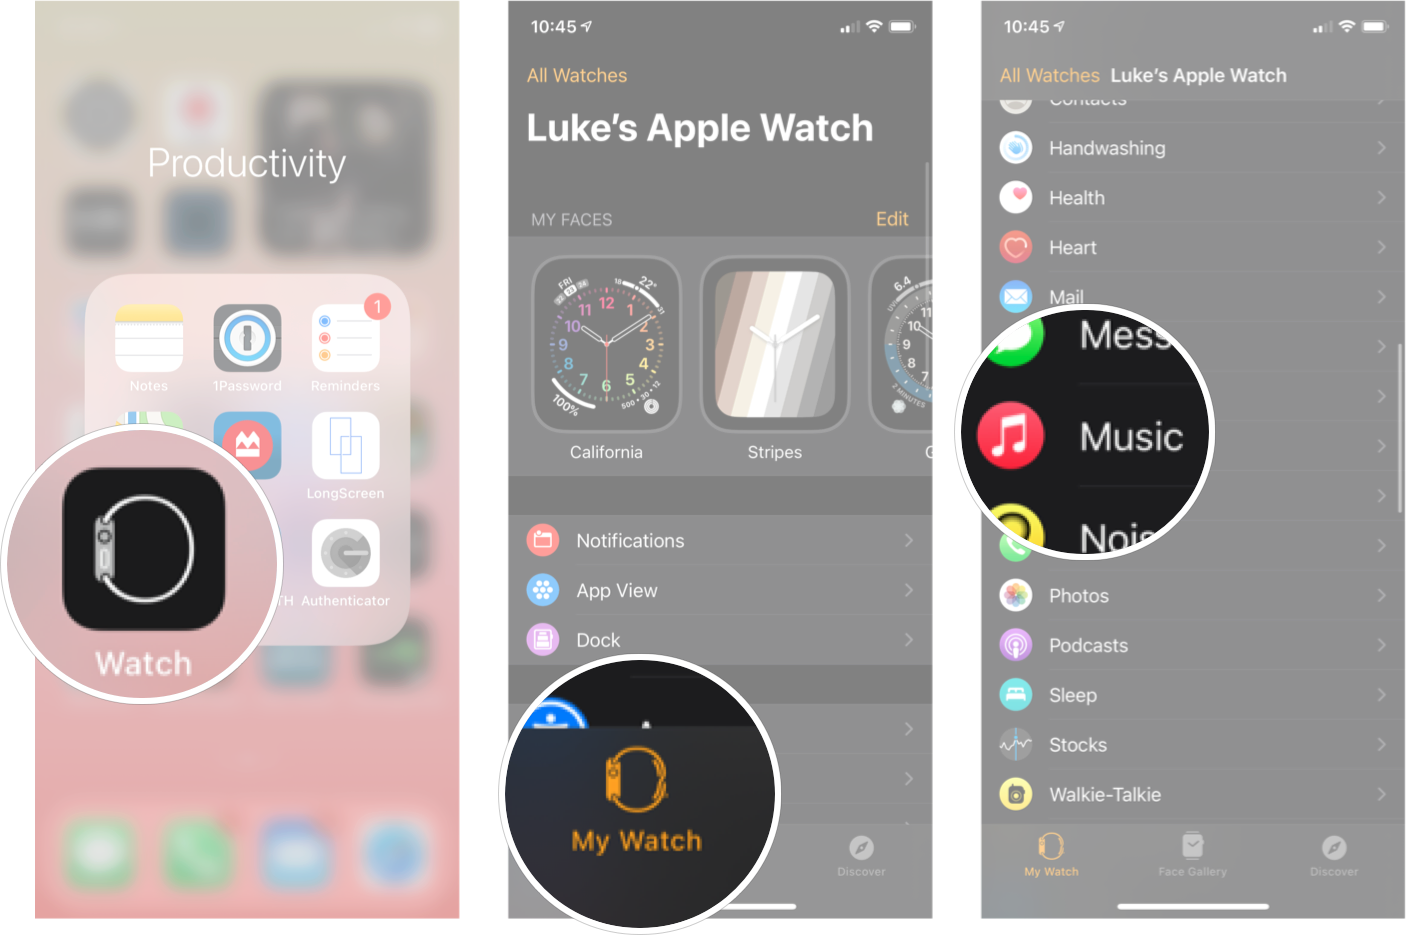 Music Settings In Watch App on iPhone: Launch the Watch app from the Home Screen on your iPhone, tap the my watch tab, and then tap music. 